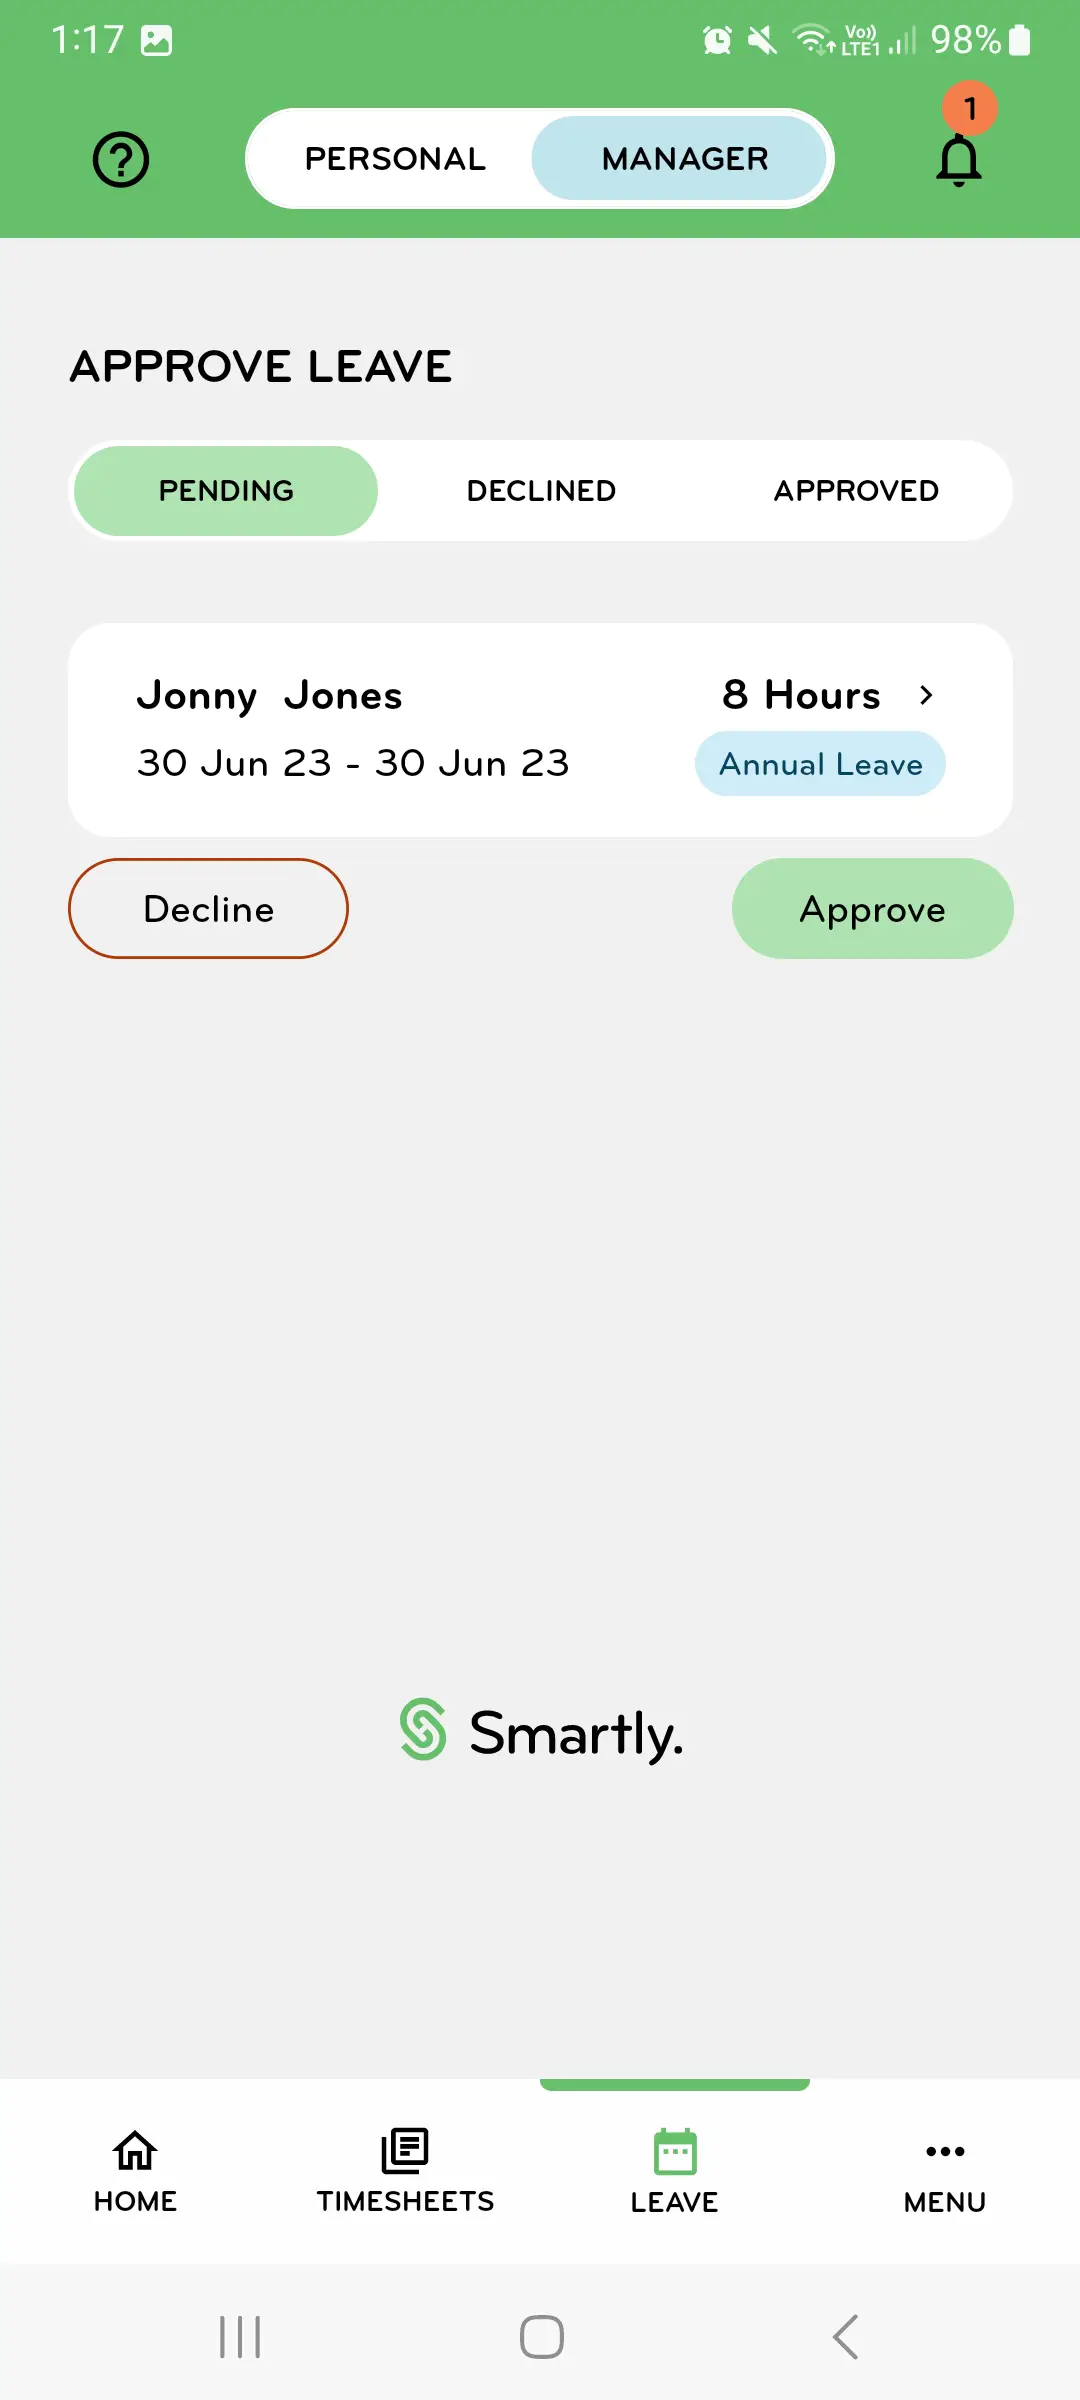 Manager's app view of employee's leave request